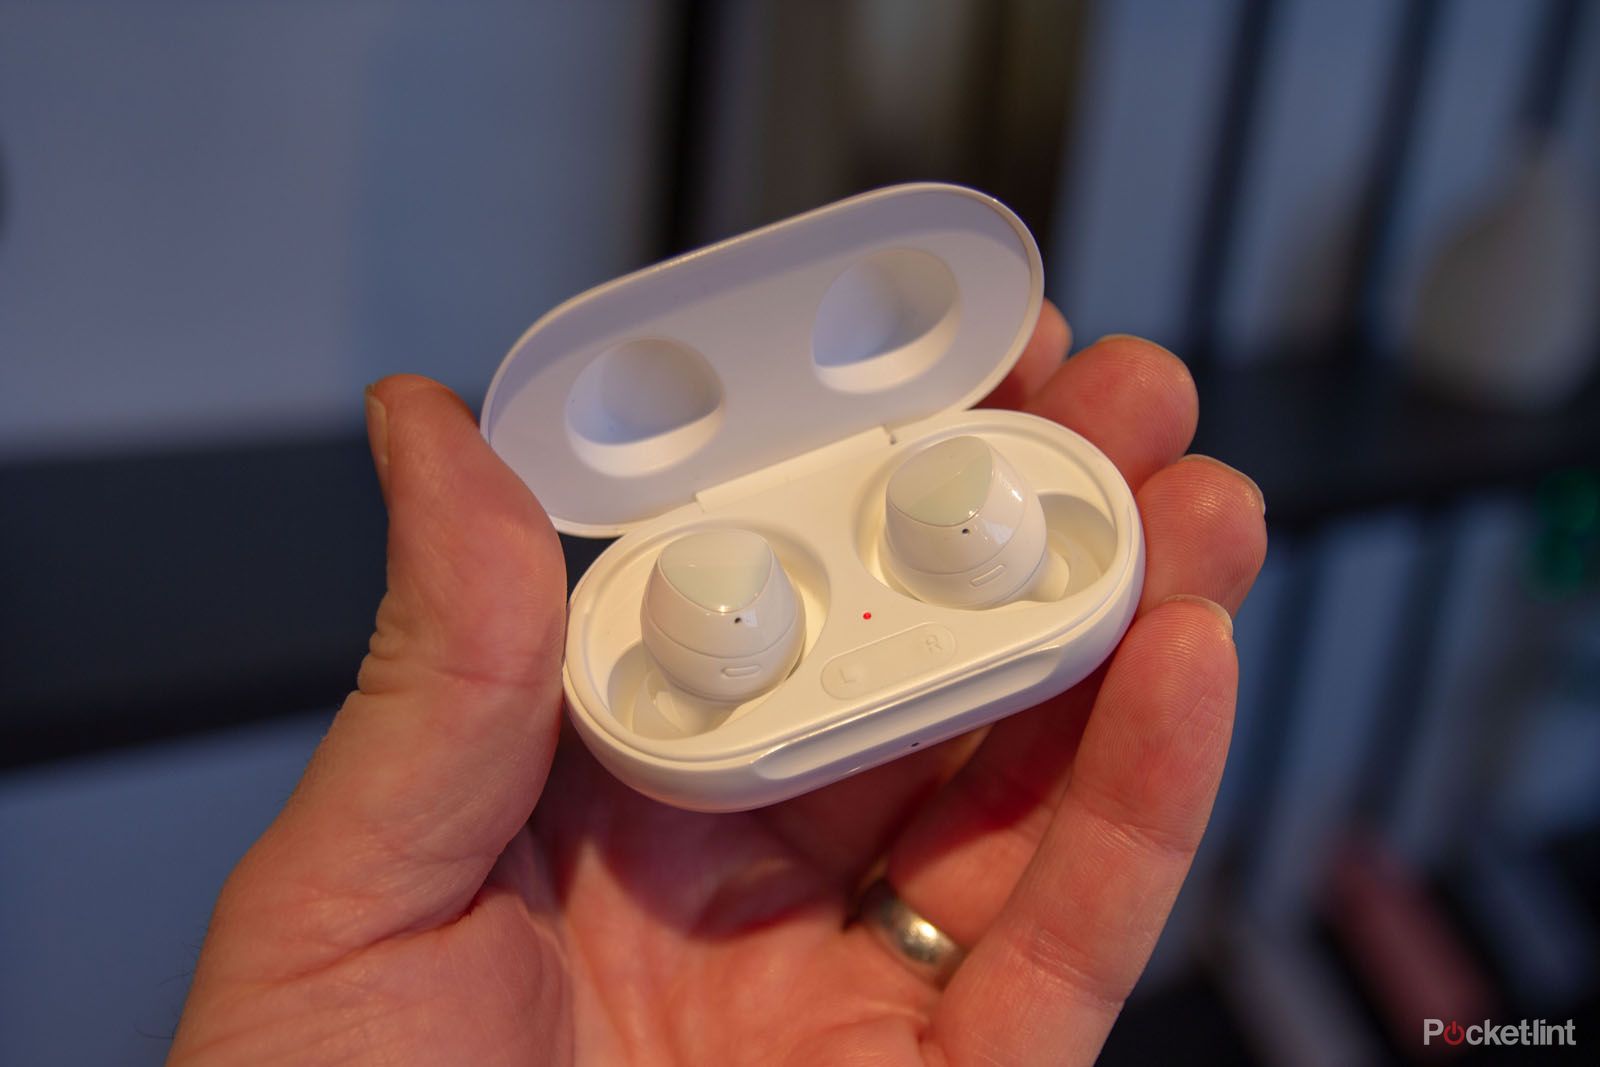 Samsung Galaxy Buds bring better battery life image 1